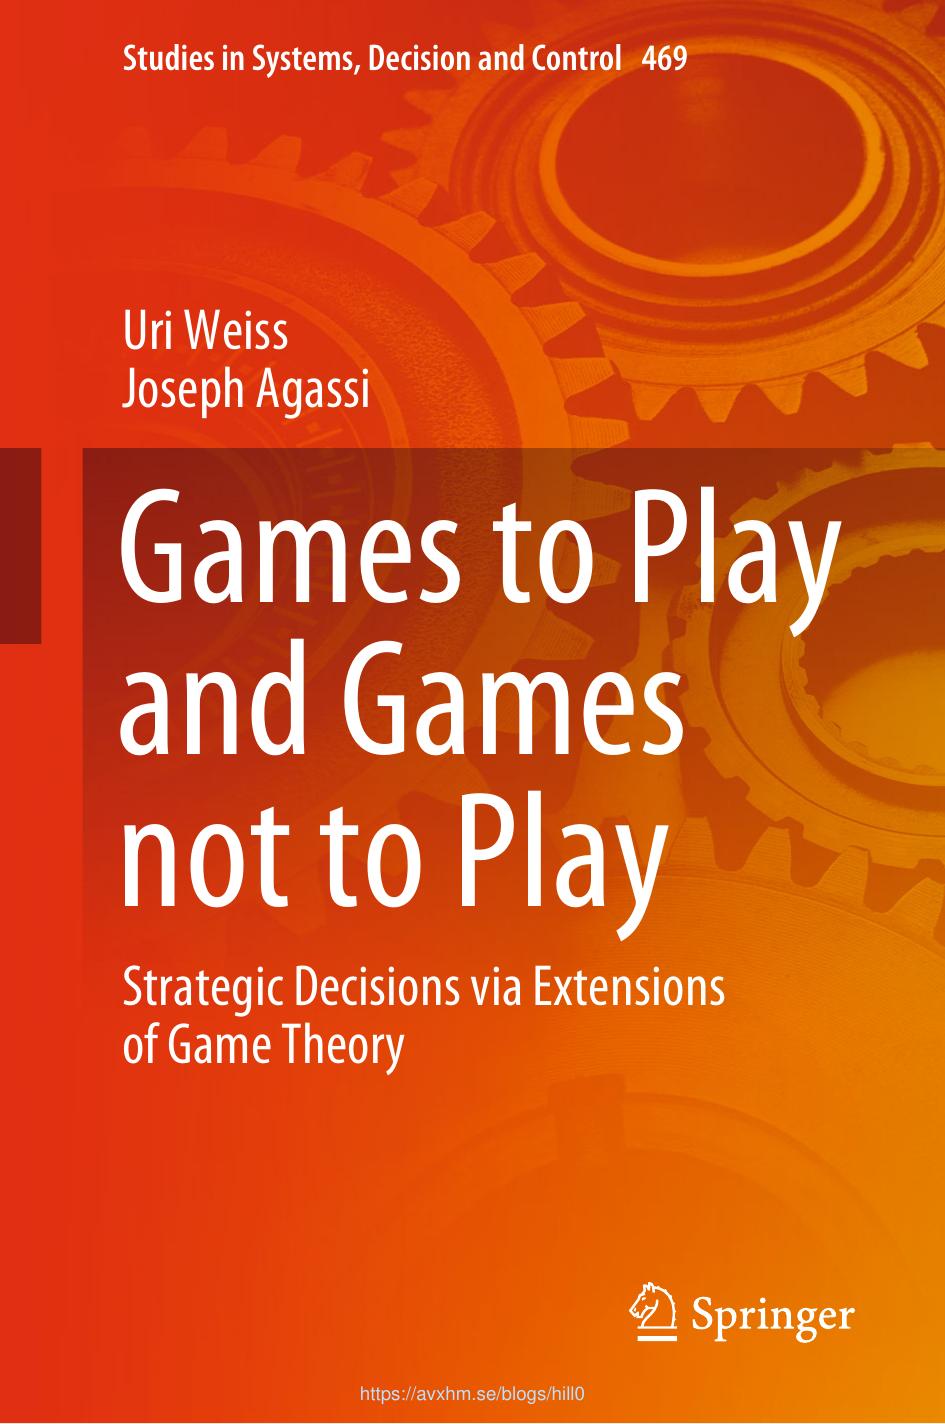 Games to Play and Games Not to Play: Strategic Decisions via Extensions of Game Theory